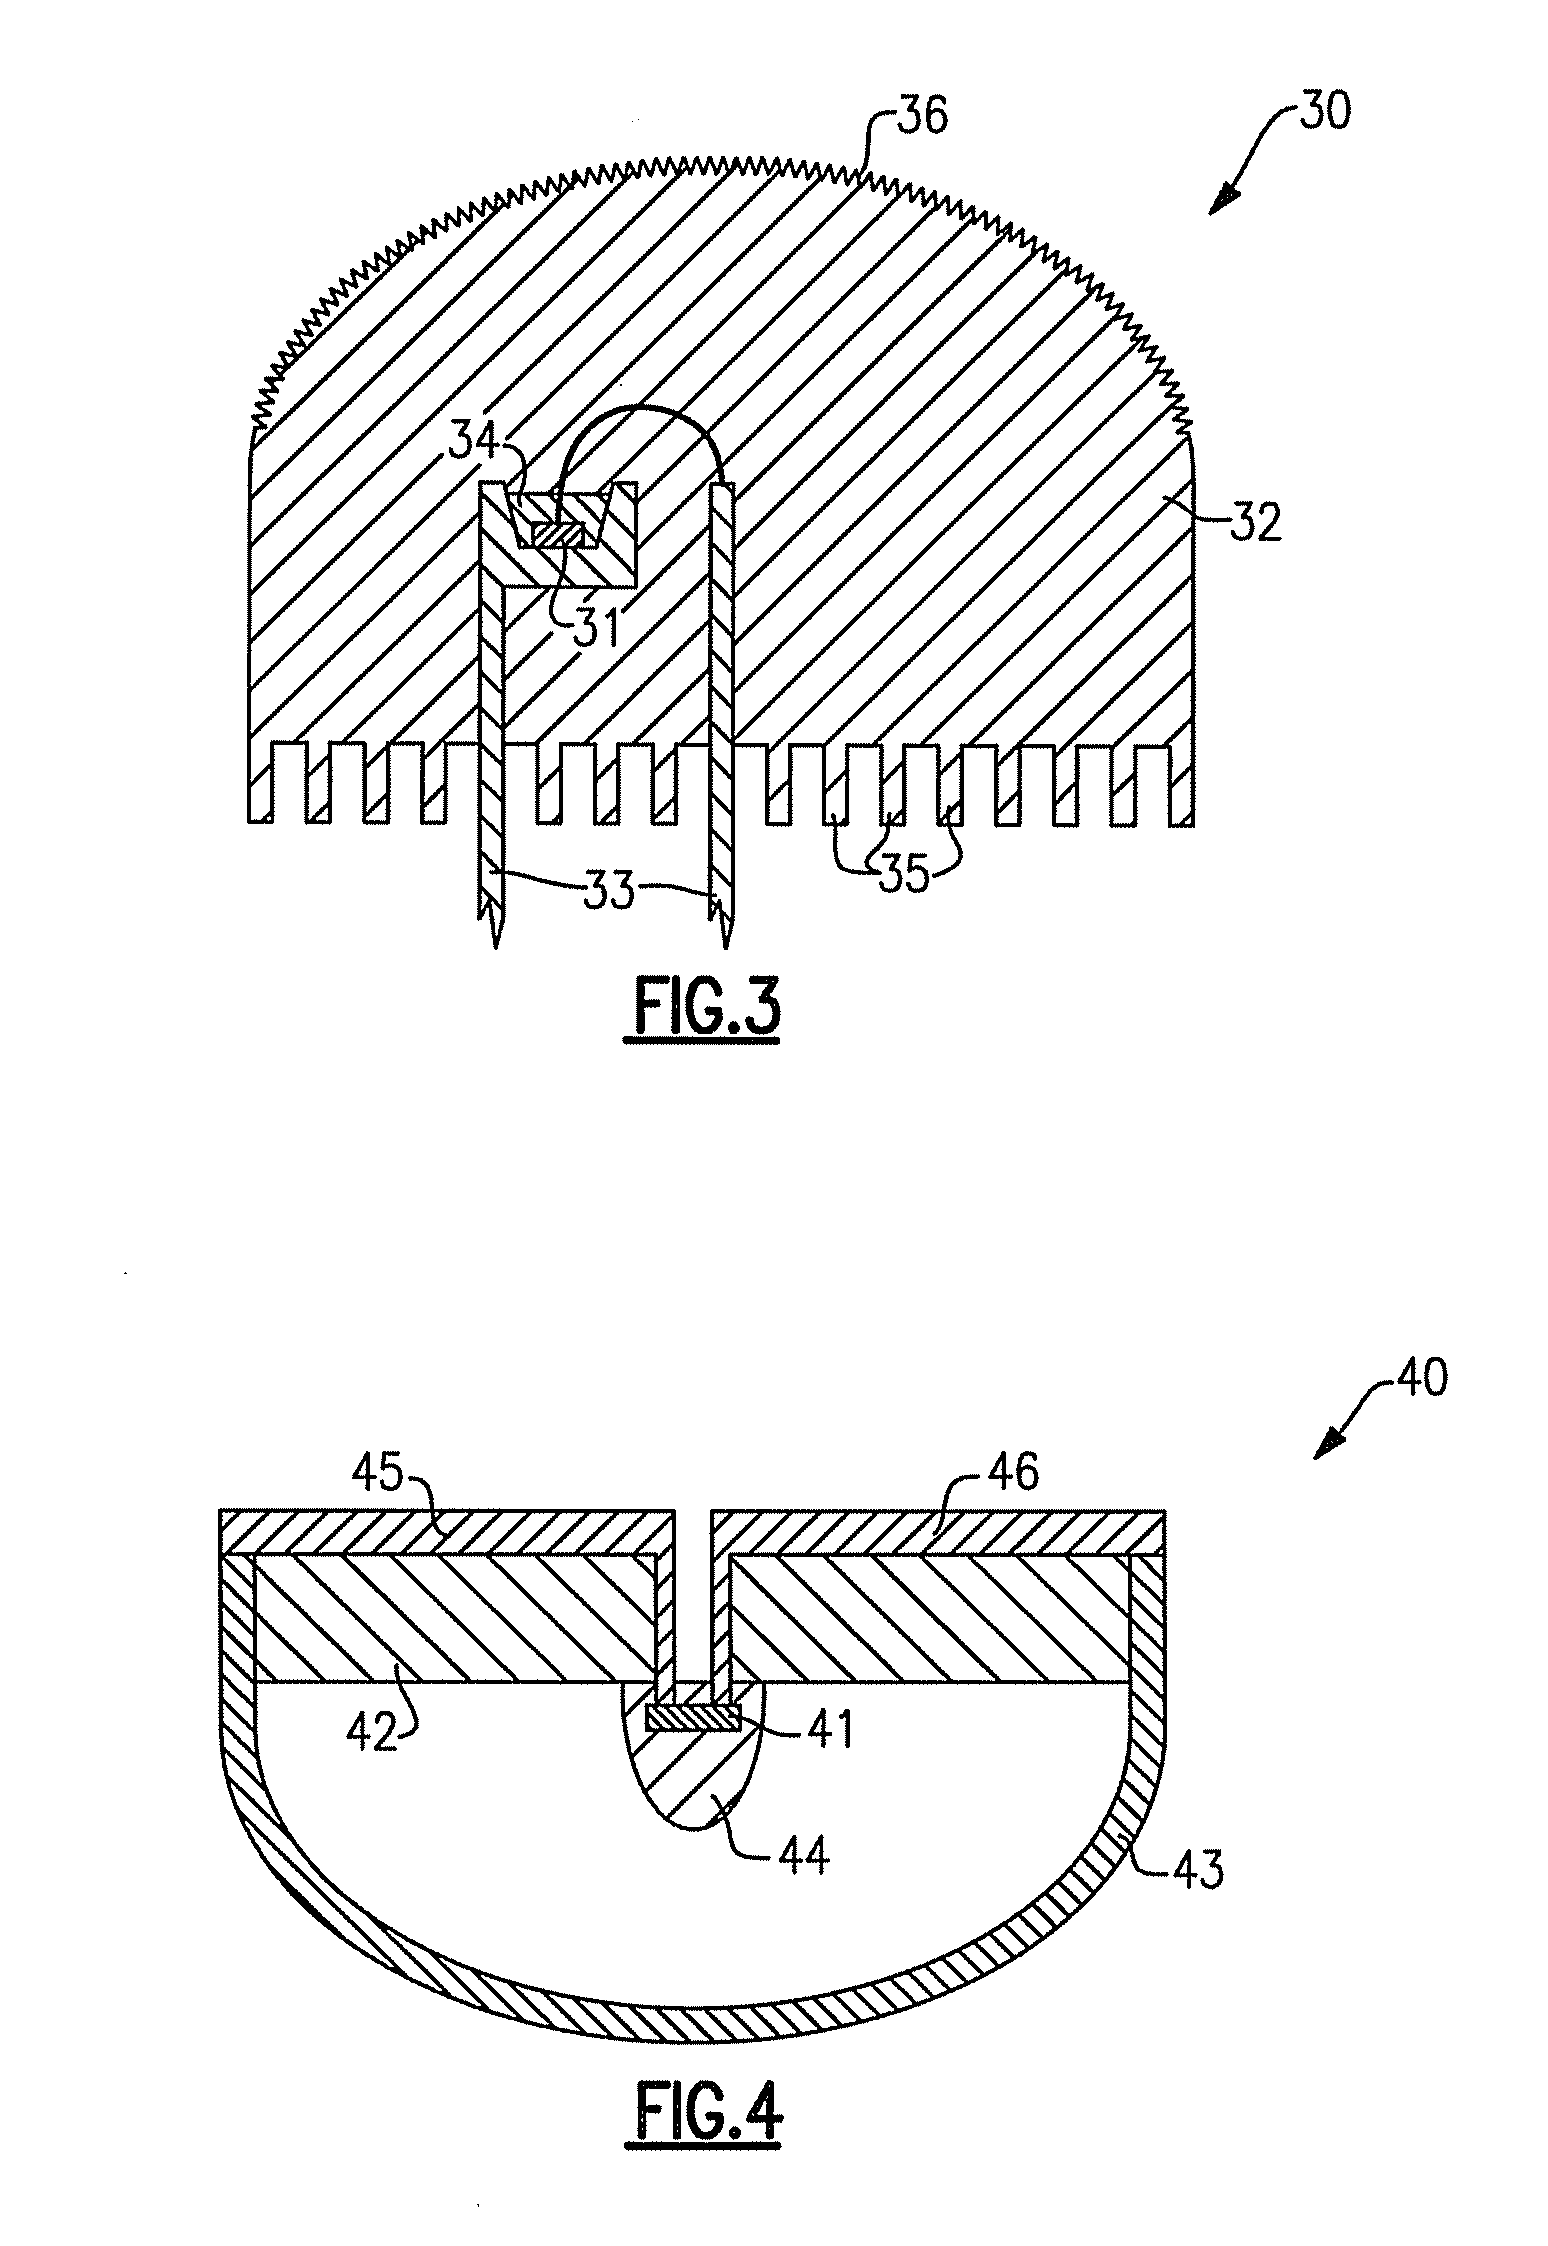 Lighting device which includes one or more solid state light emitting device